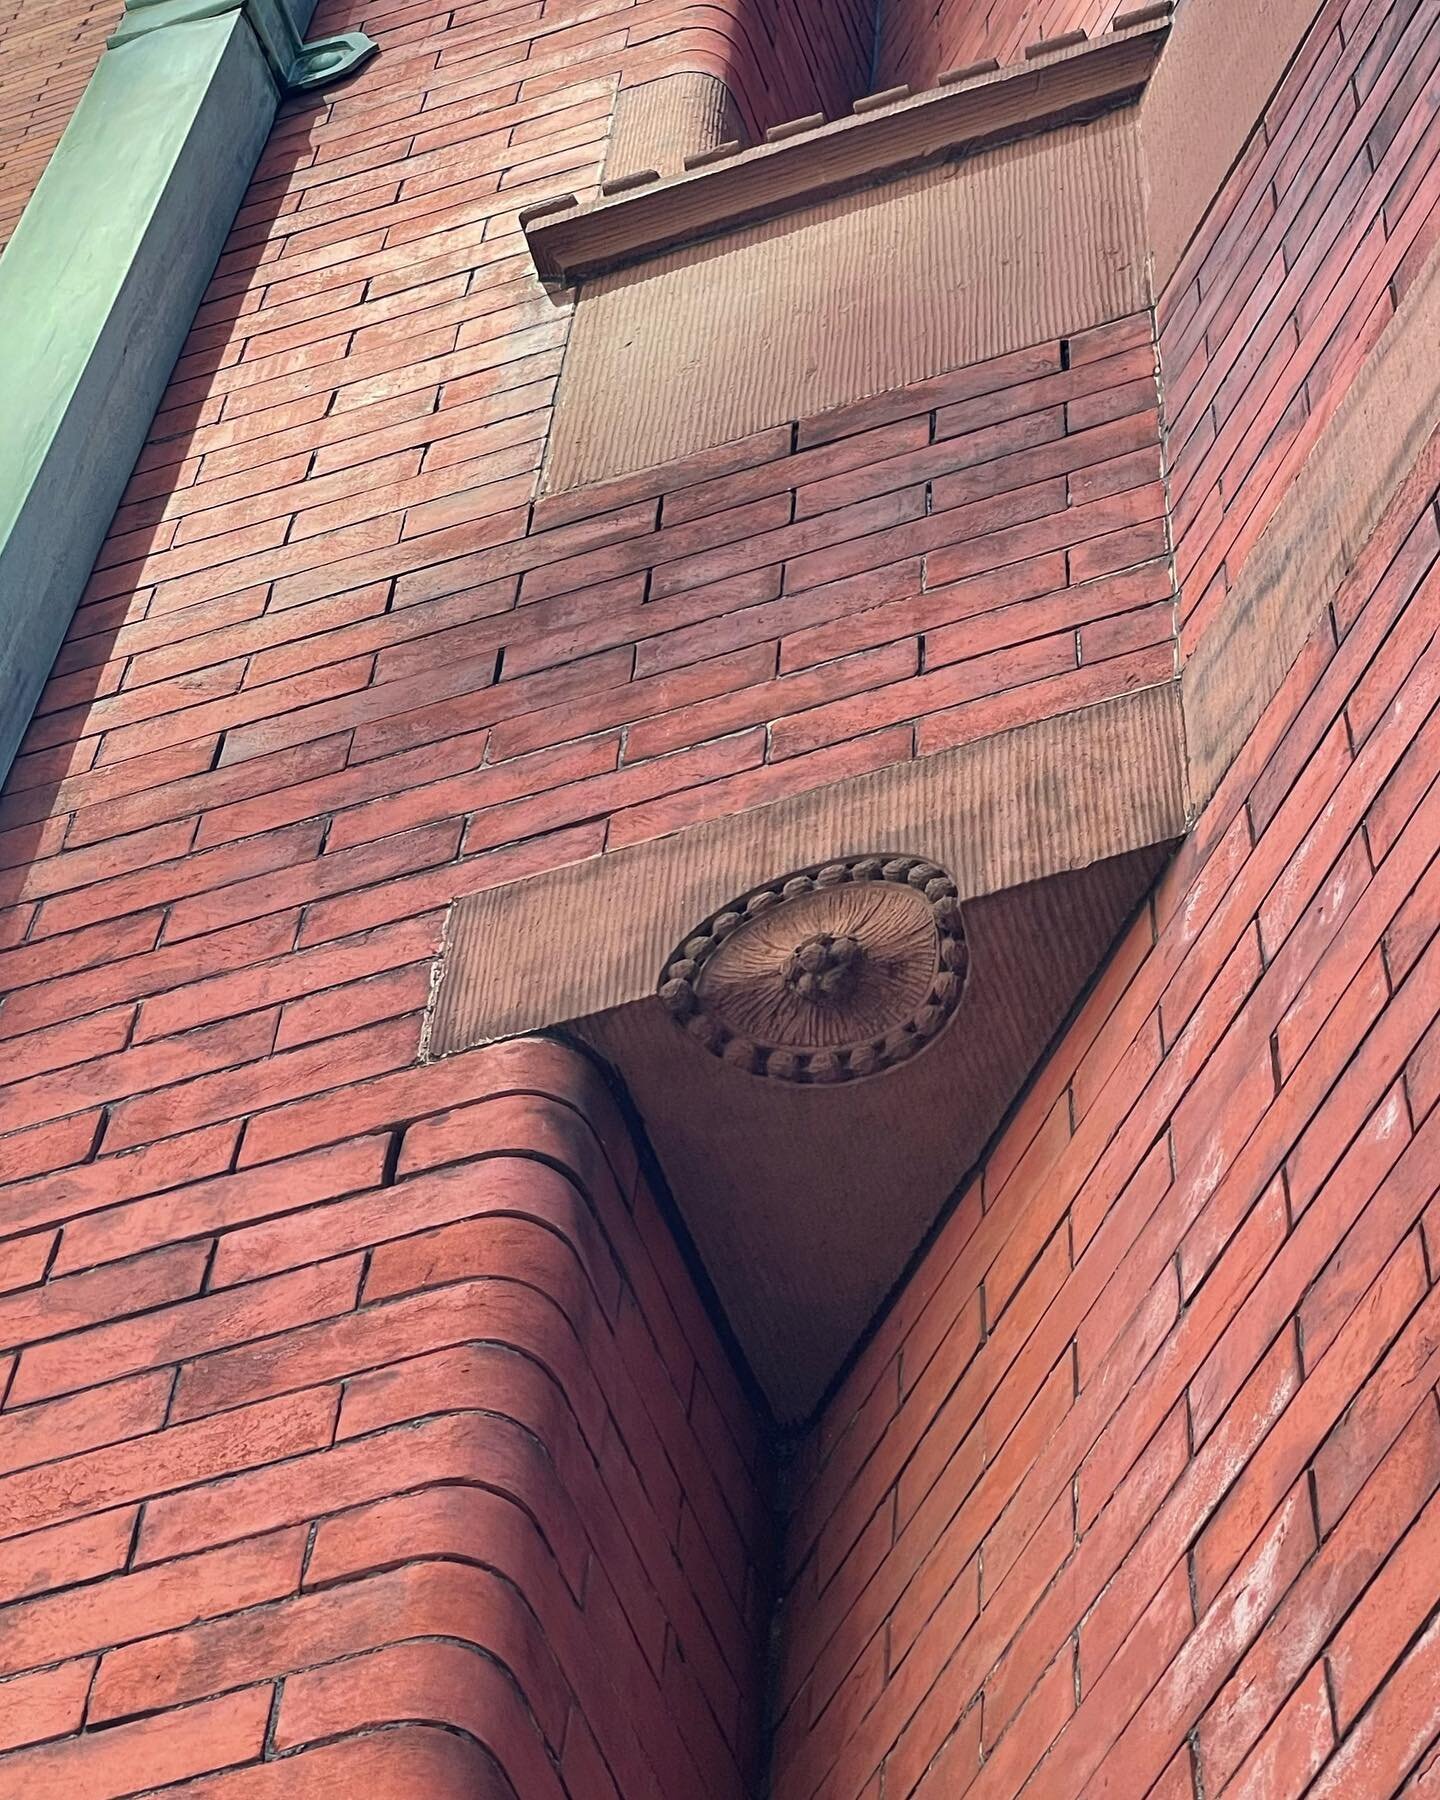 Those details tho! We&rsquo;re also suckers for some curved brick. 

&mdash;&mdash;&mdash;&mdash;&mdash;&mdash;&mdash;&mdash;&mdash;&mdash;&mdash;&mdash;&mdash;&mdash;&mdash;&mdash;-
#lookup #lookupbaltimore #lookupmore #bitsofbuildings #baltimorearc